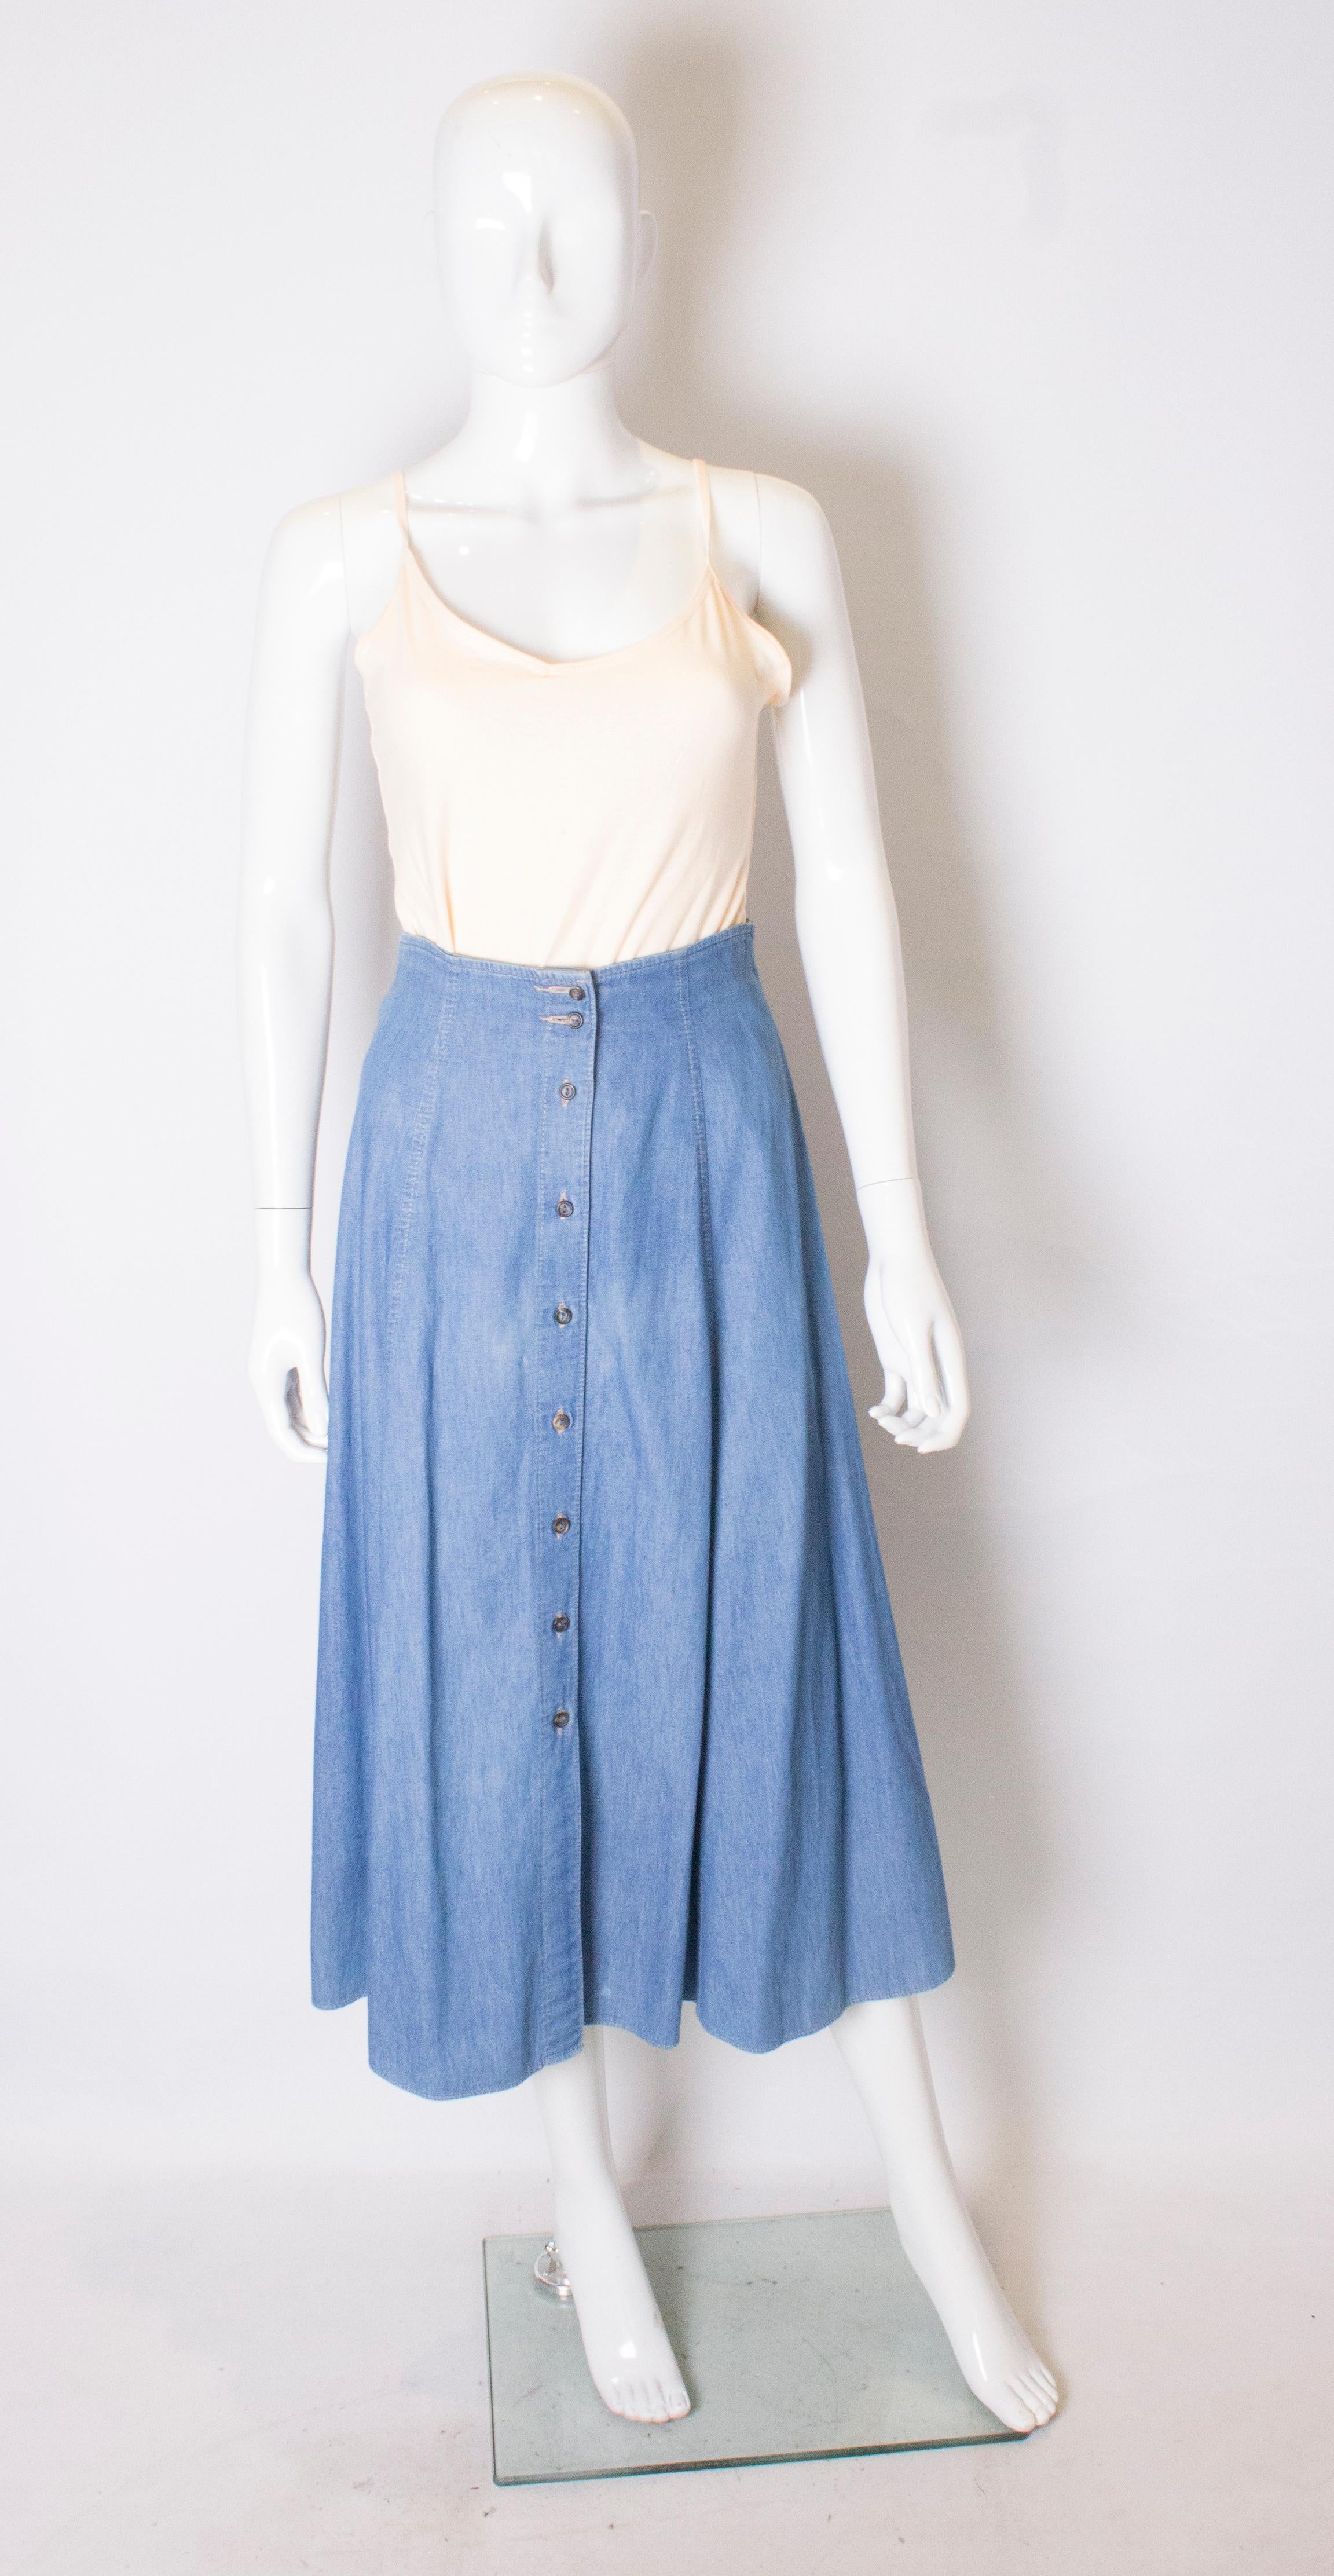 An easy to wear vintage denim skirt by Marks and Spencers /St Michaels. The skirt is in a soft blue colour with button through opening , and is panelled.